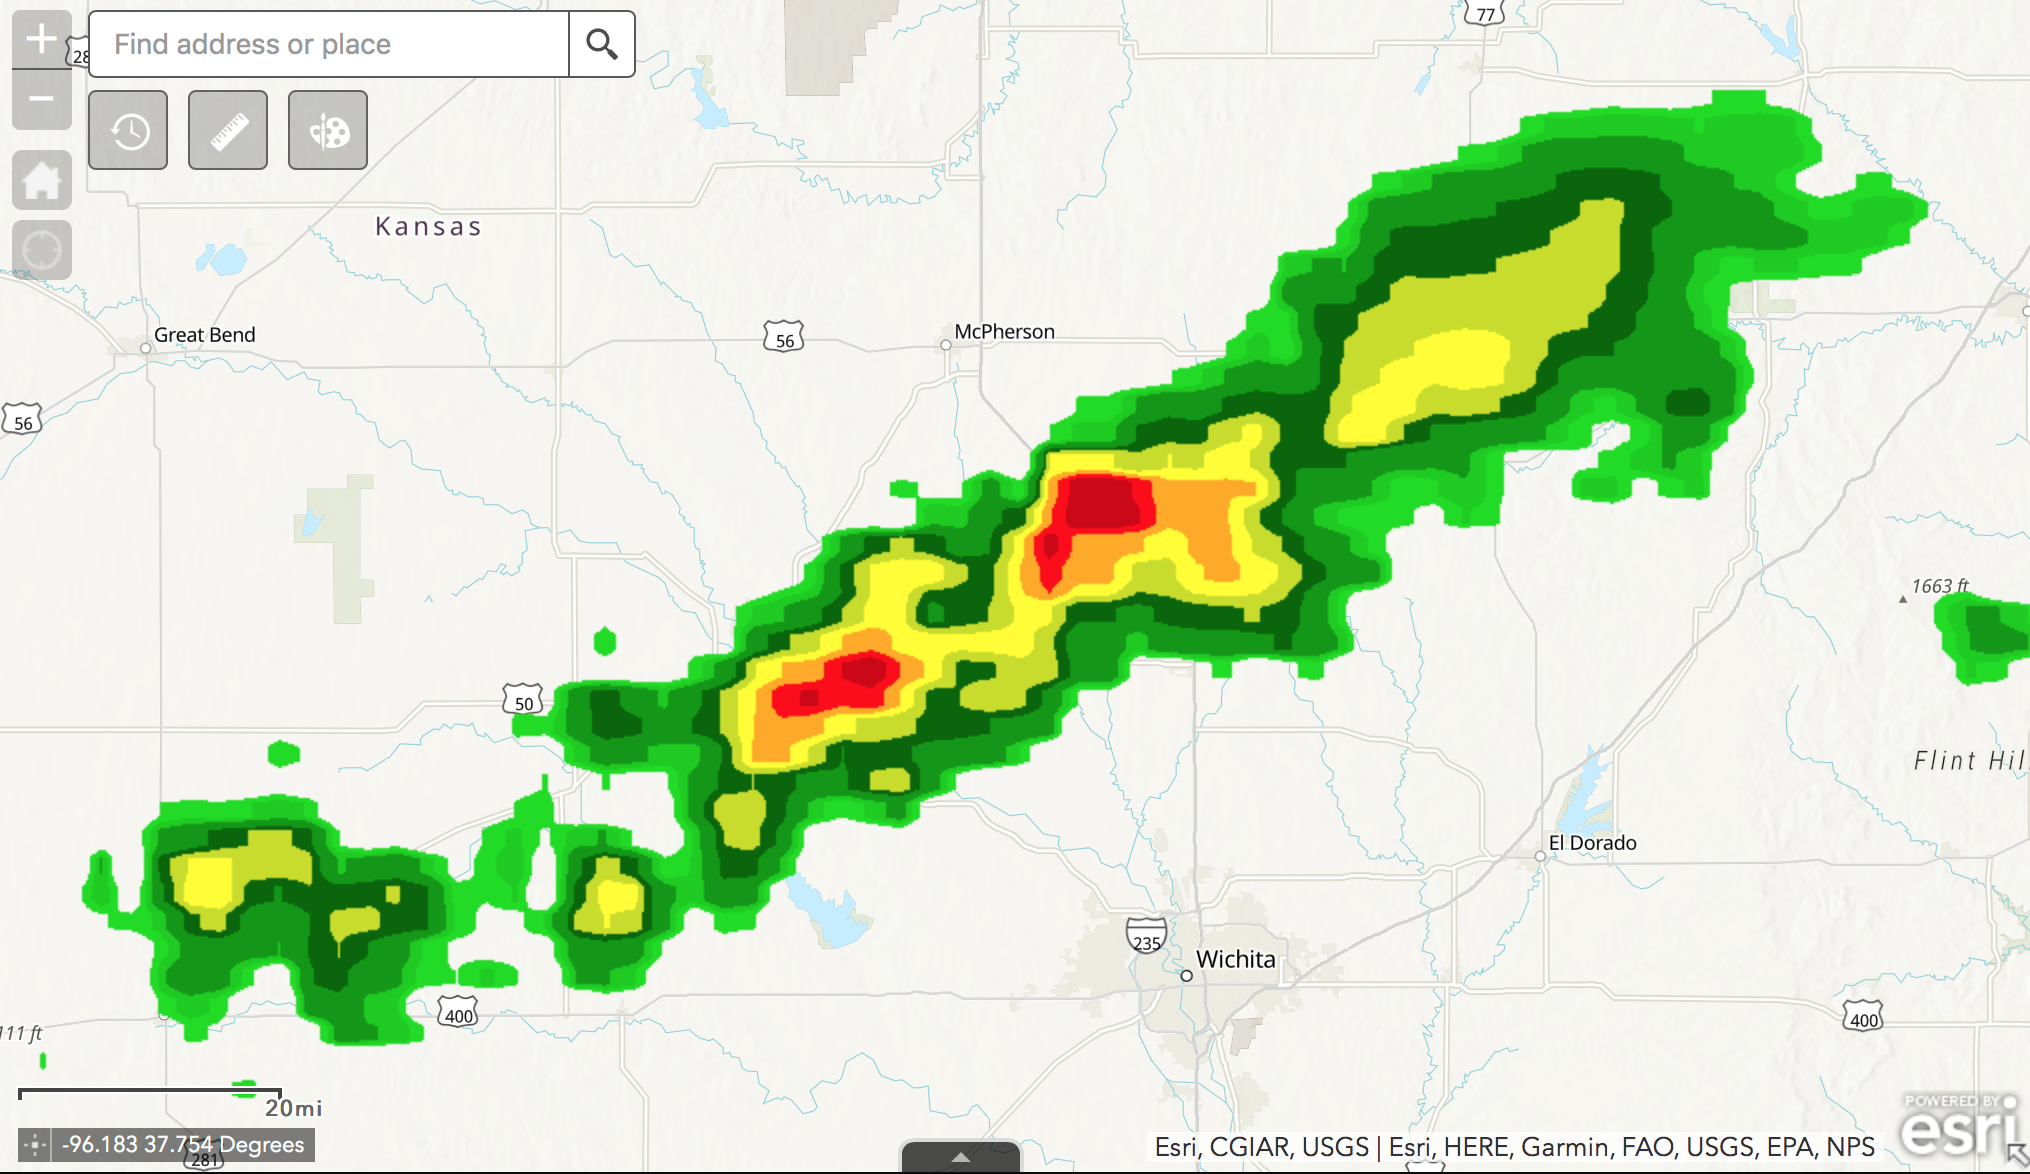 Modeling of Storms Using ArcGIS